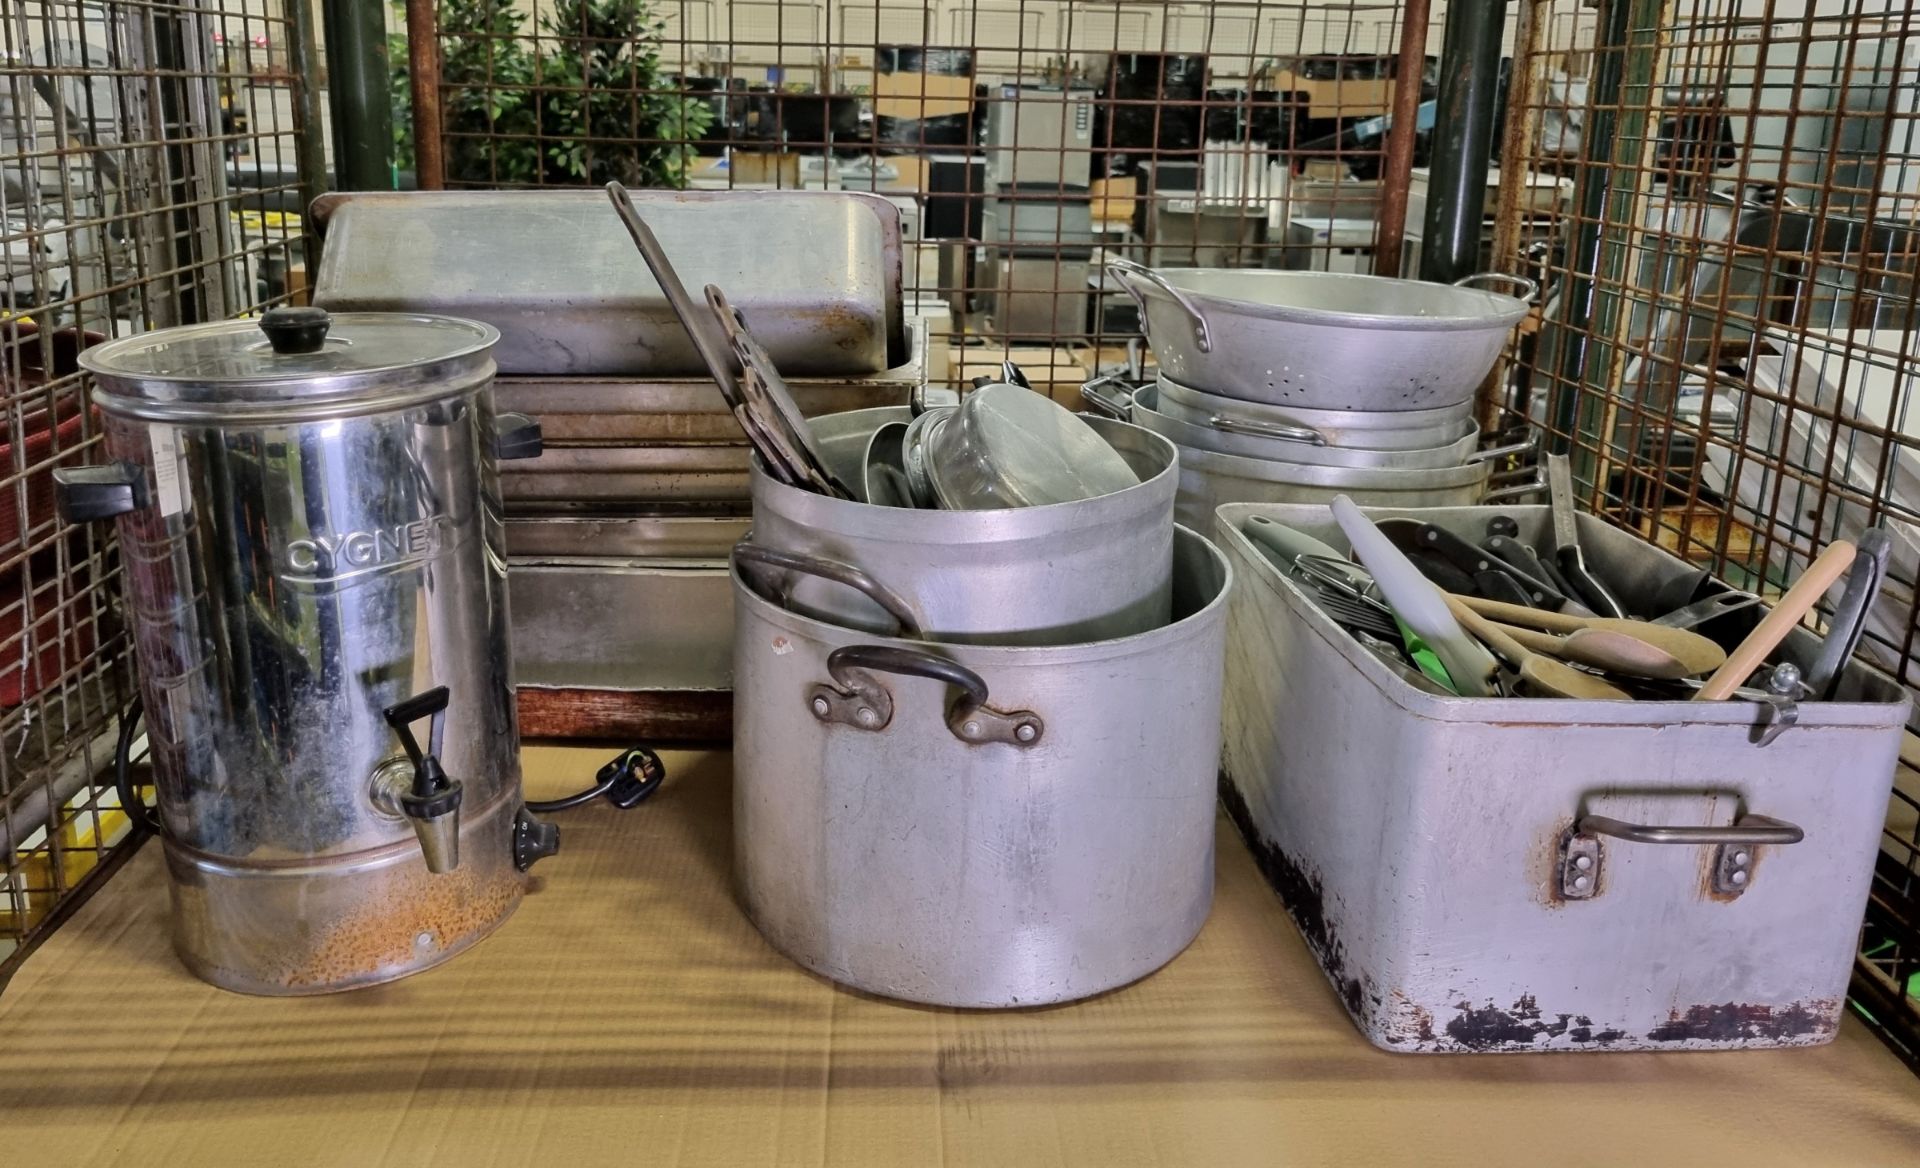 Catering equipment - large bain marie trays, roasting trays, iron frying pans and saucepans, sieves - Image 2 of 12